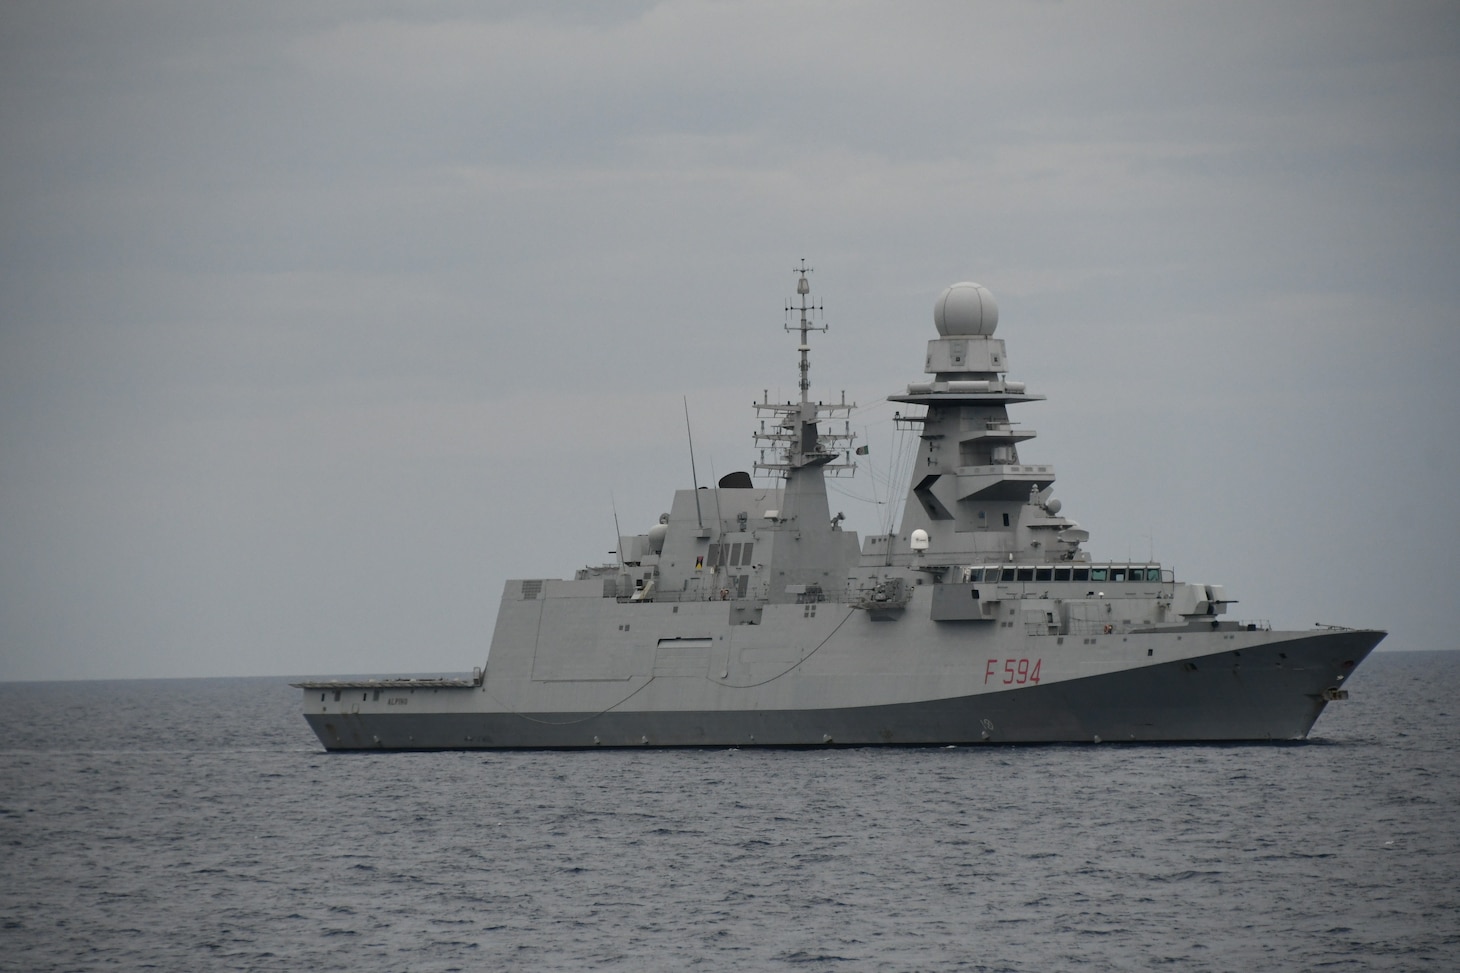 Carlo Bergamini-class frigate ITS Alpino ( F594) conducted cross-deck boat operations with Arleigh Burke-class guided missile destroyer USS JAMES E. WILLIAMS (DDG 95).